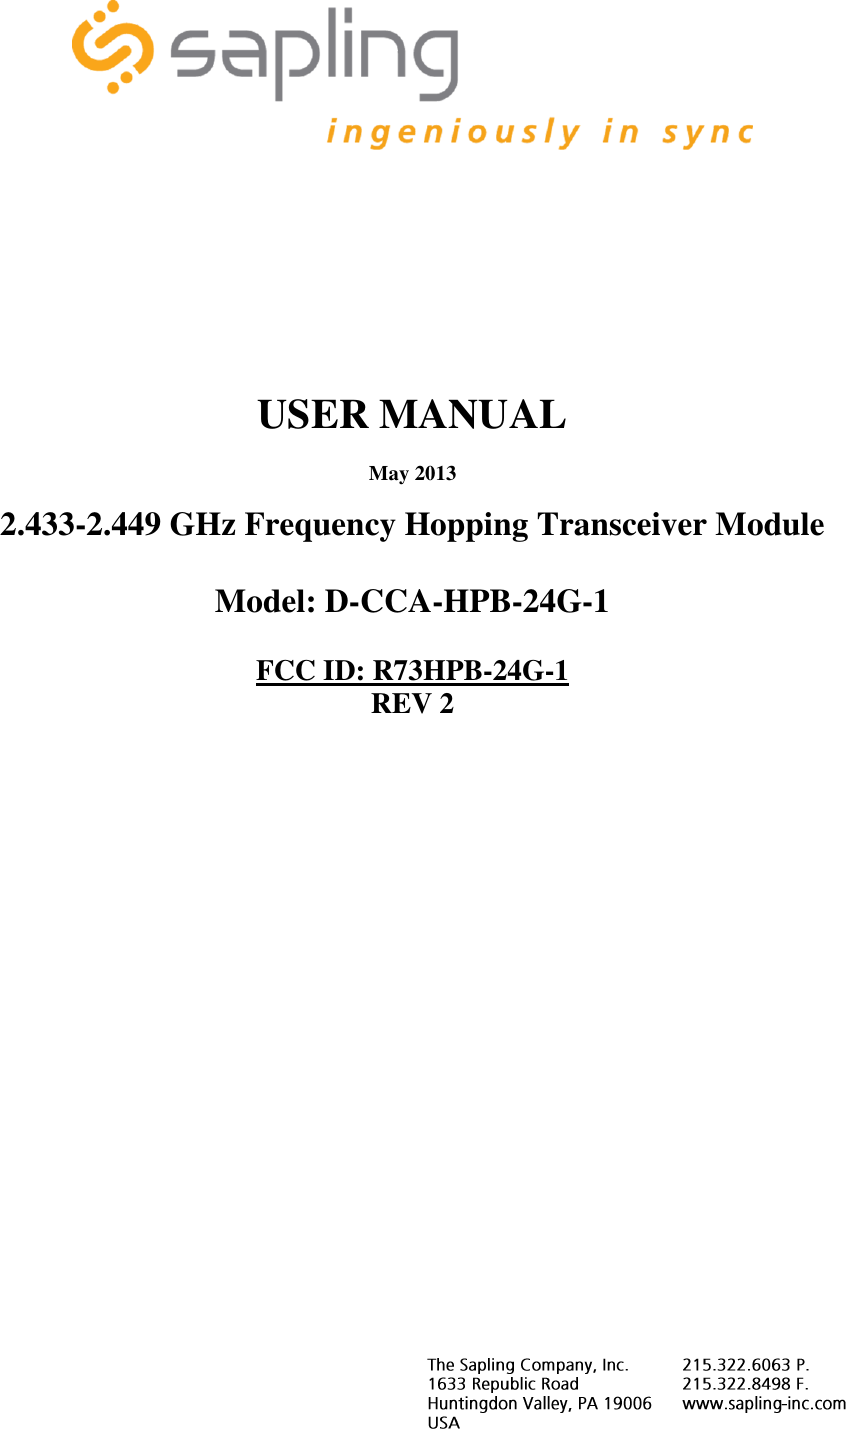          USER MANUAL  May 2013  2.433-2.449 GHz Frequency Hopping Transceiver Module   Model: D-CCA-HPB-24G-1  FCC ID: R73HPB-24G-1 REV 2              